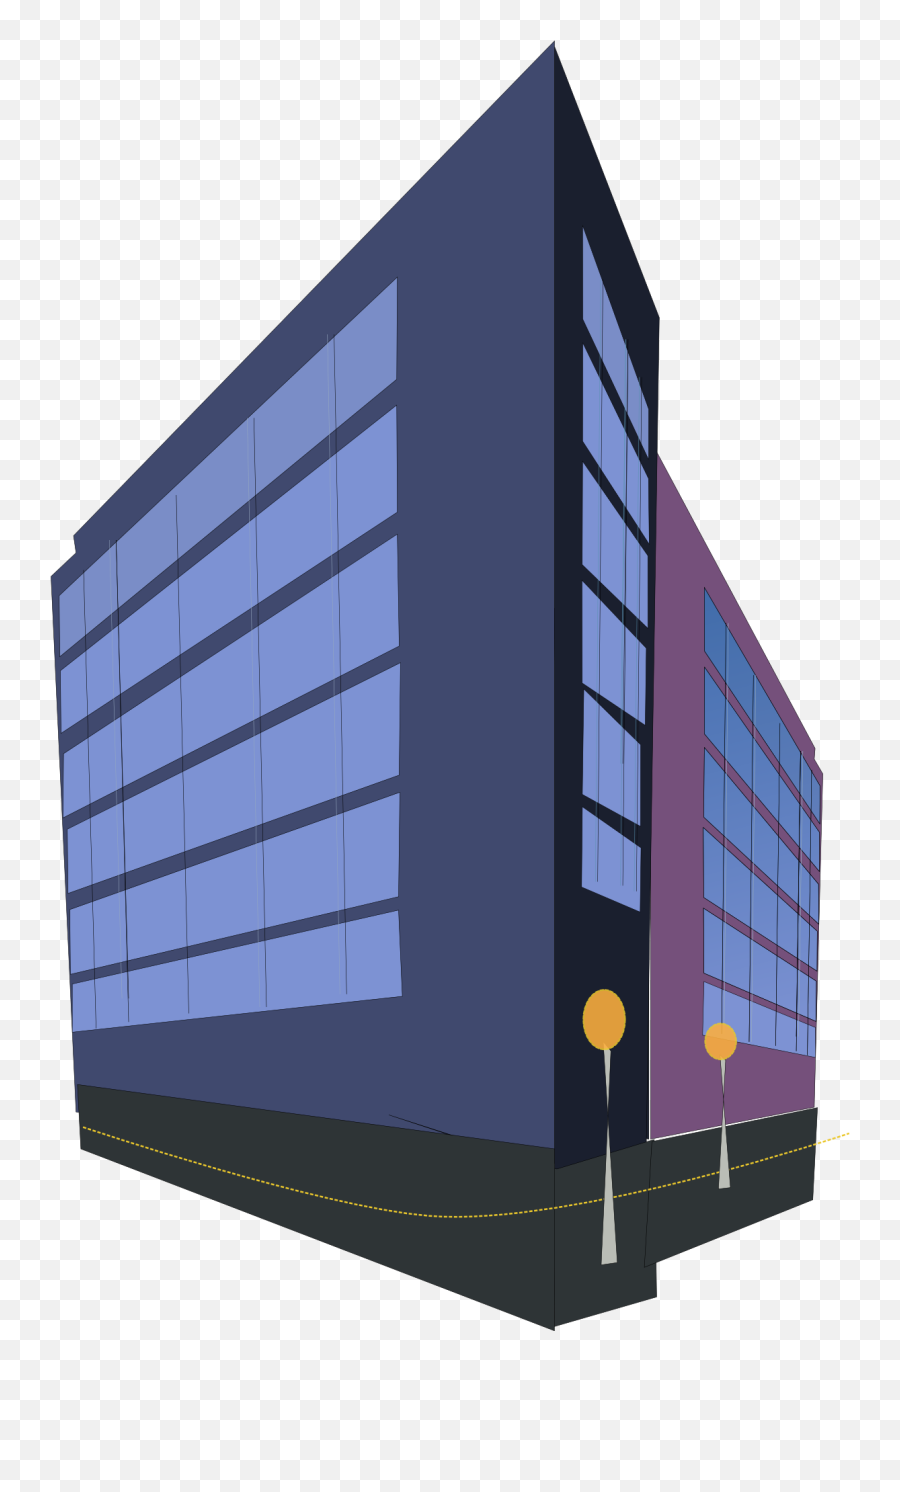 Clipart Of Buildings Skyscrapers Free Image - Company Clipart Emoji,Buildings Clipart